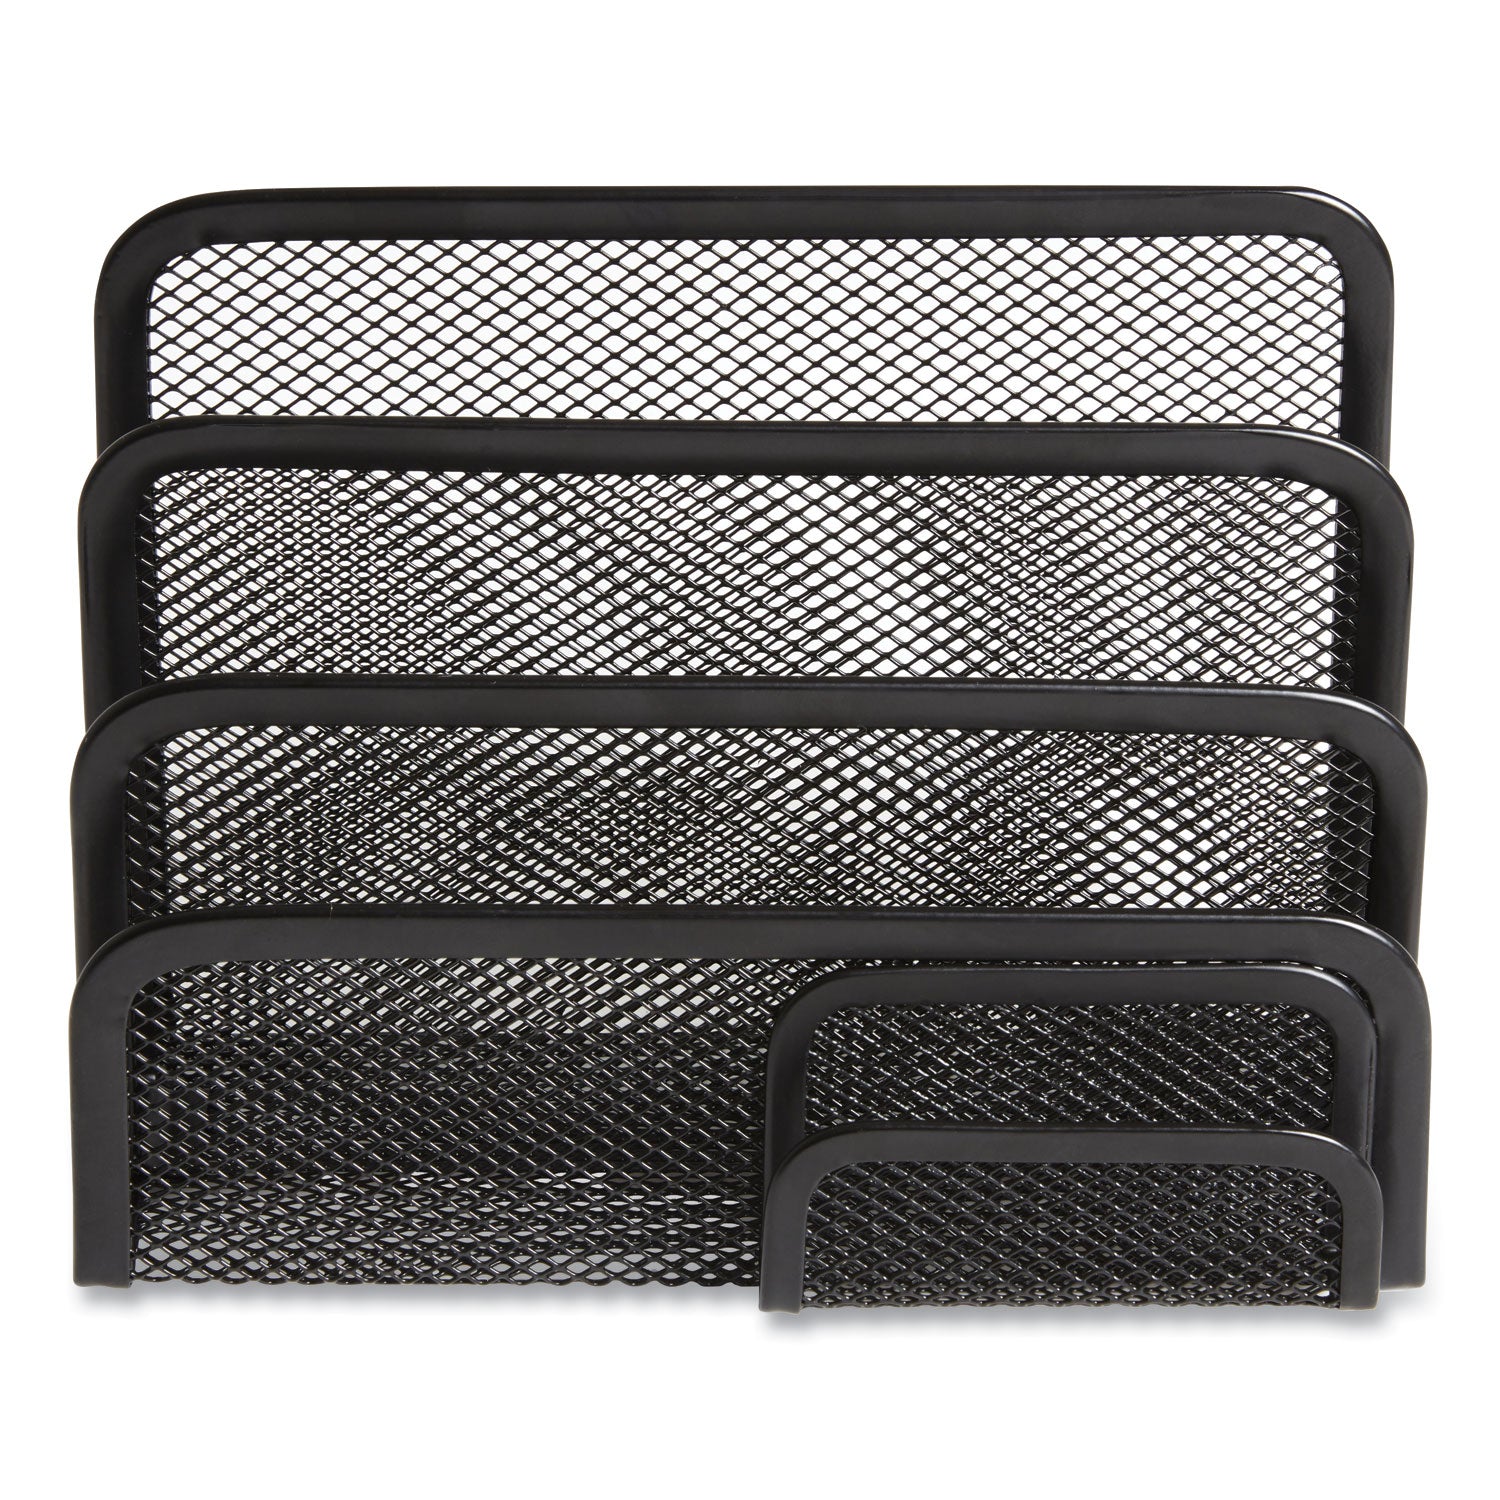 wire-mesh-mail-sorter-with-business-card-holder-4-sections-#6-1-4-to-#16-envelopes-559-x-393-x-755-matte-black_tud24402451 - 2